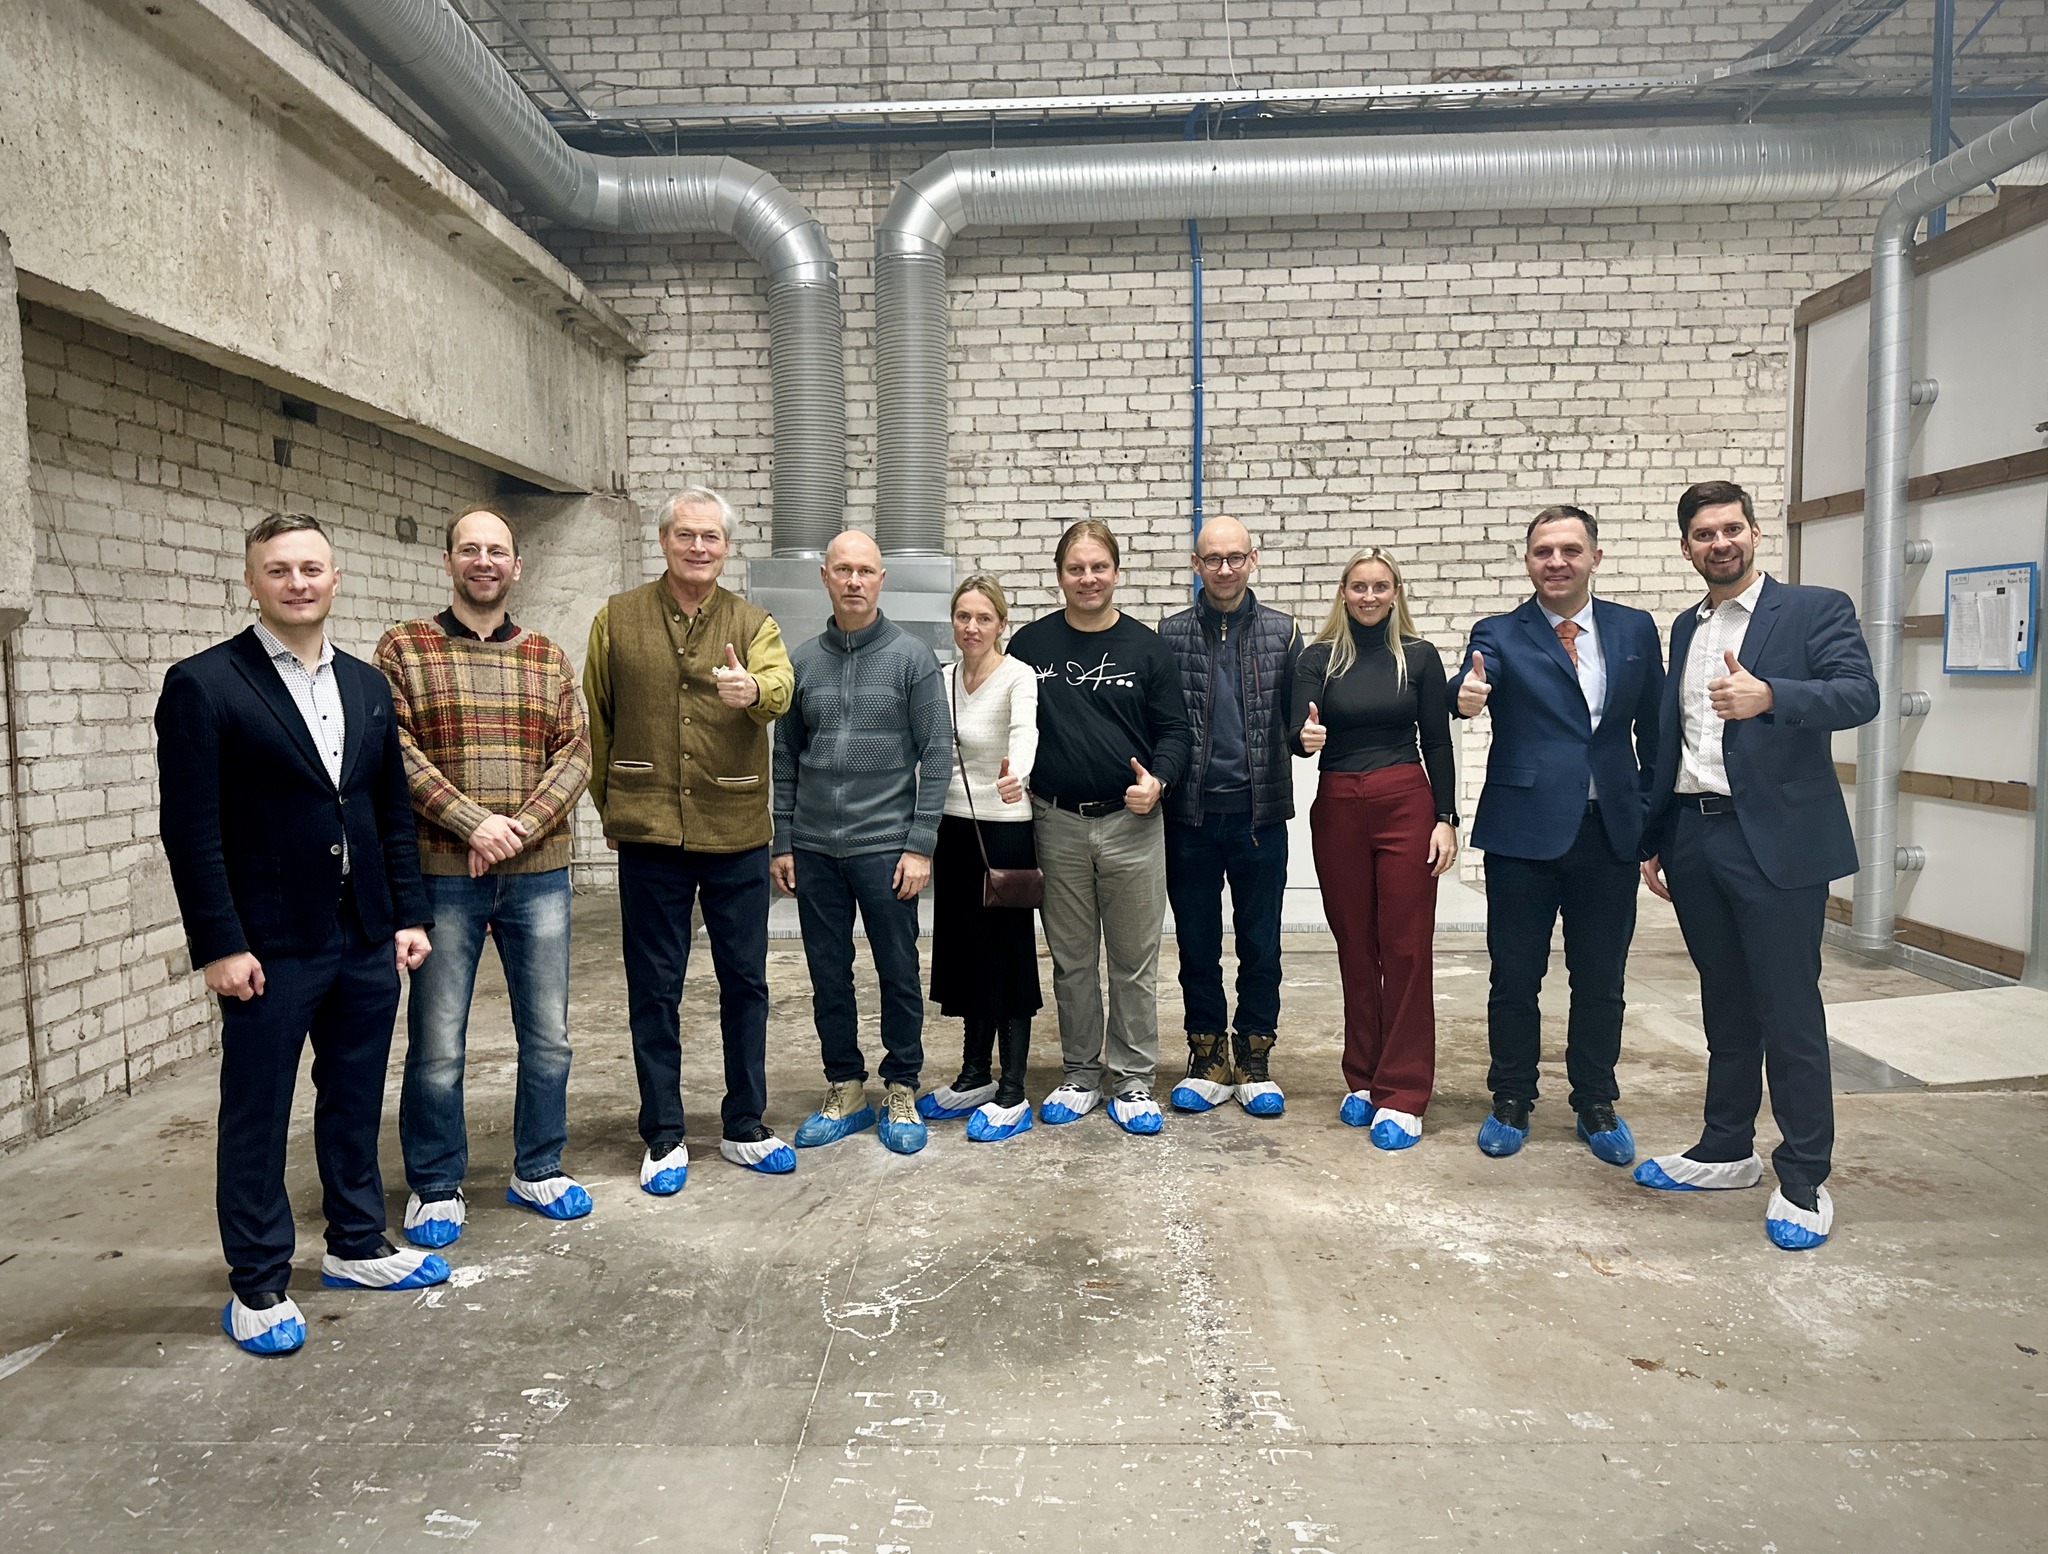 Gunther Pauli, globally renowned entrepreneur and author of the book 'The Blue Economy,' inspected the Shroomwell factory during his visit to Tõrva